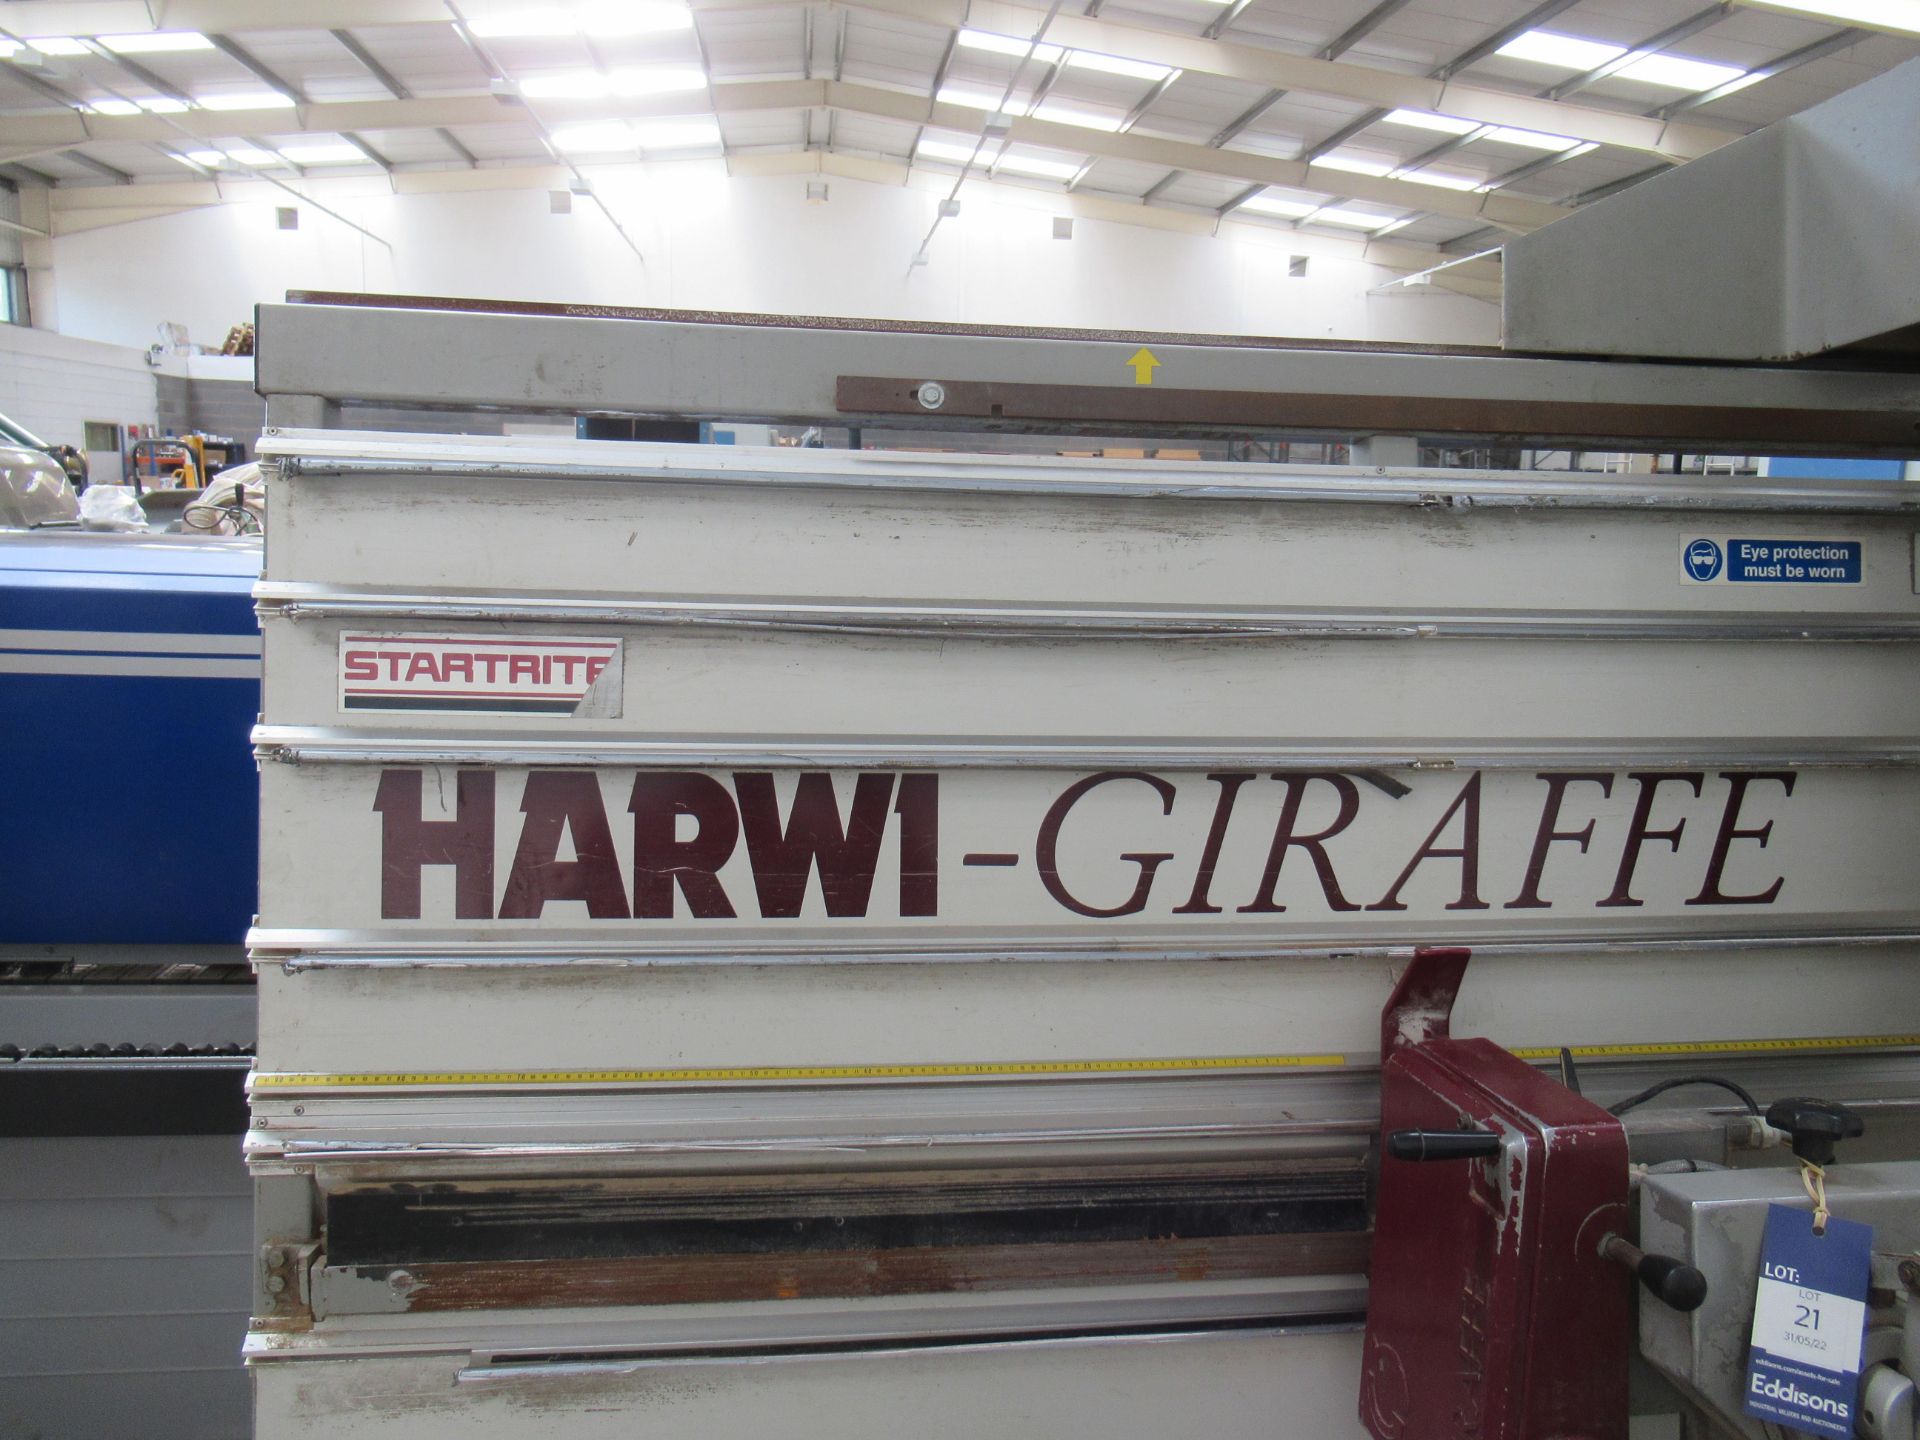 Startrite Hawri-Giraffe Vertical Wall Saw Type 1250 Mach No 5006CZ, YOM 2001, 400V. Please note ther - Image 2 of 3